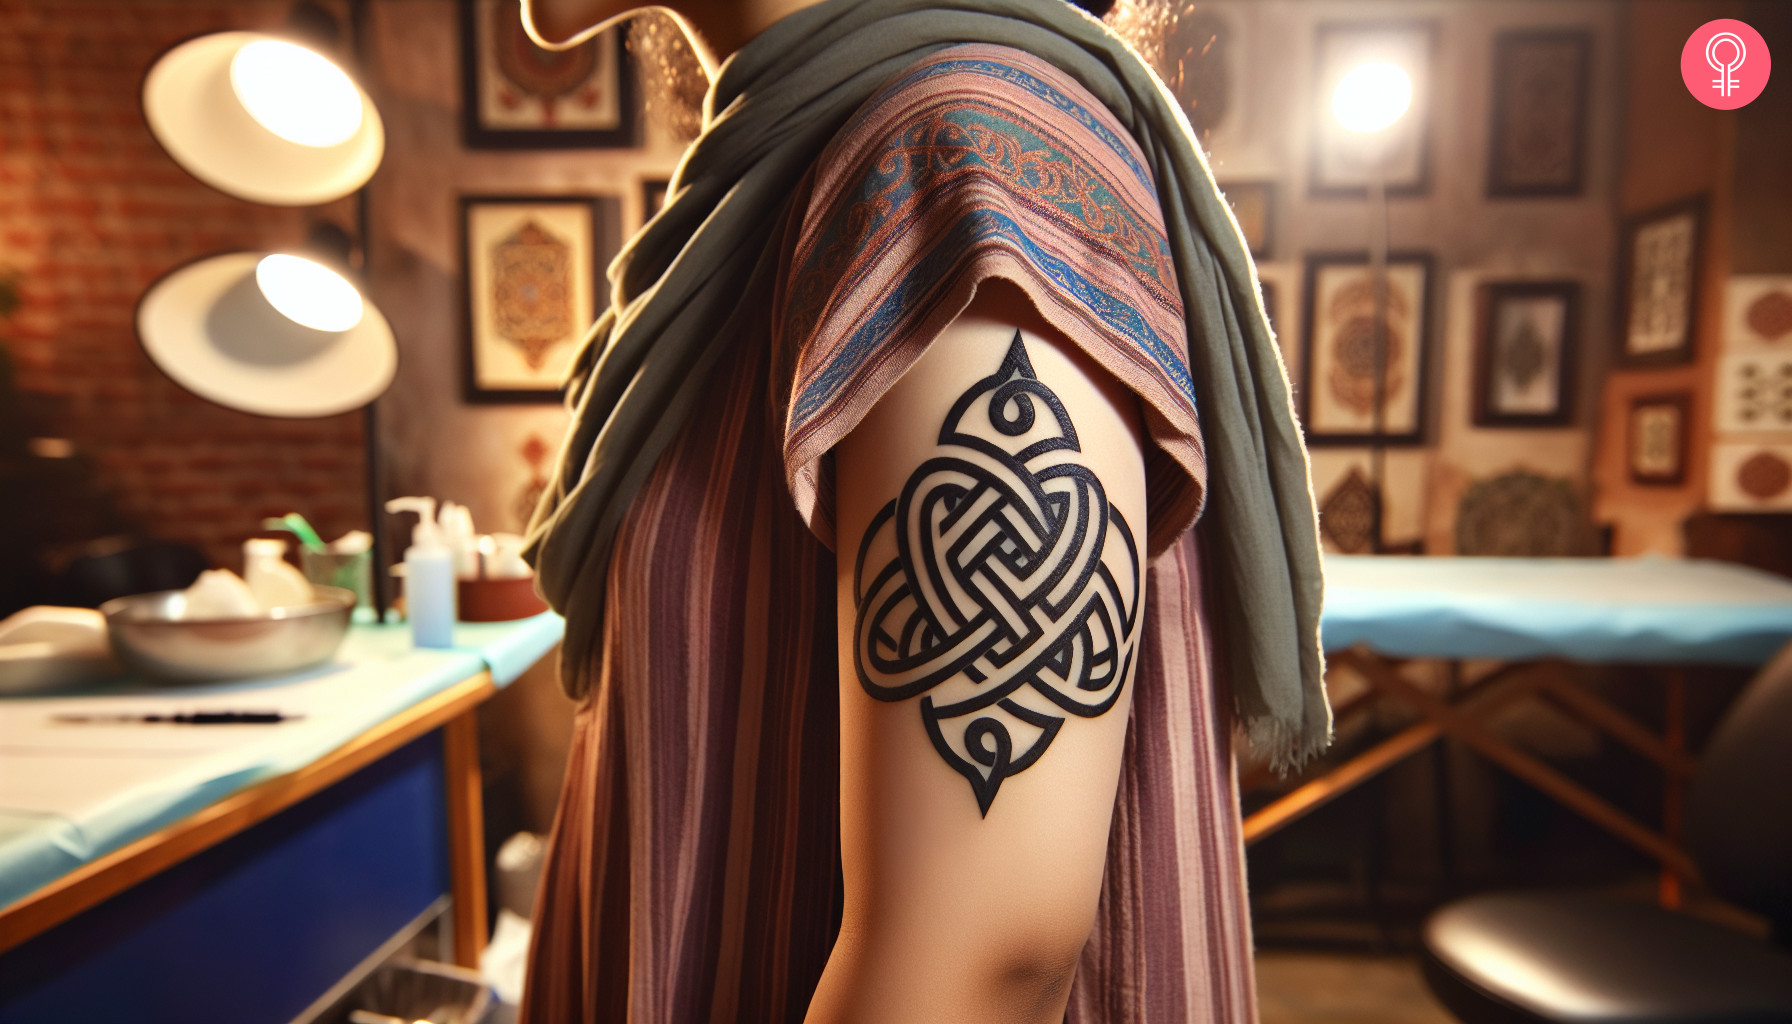 Family celtic knot tattoo on the upper arm